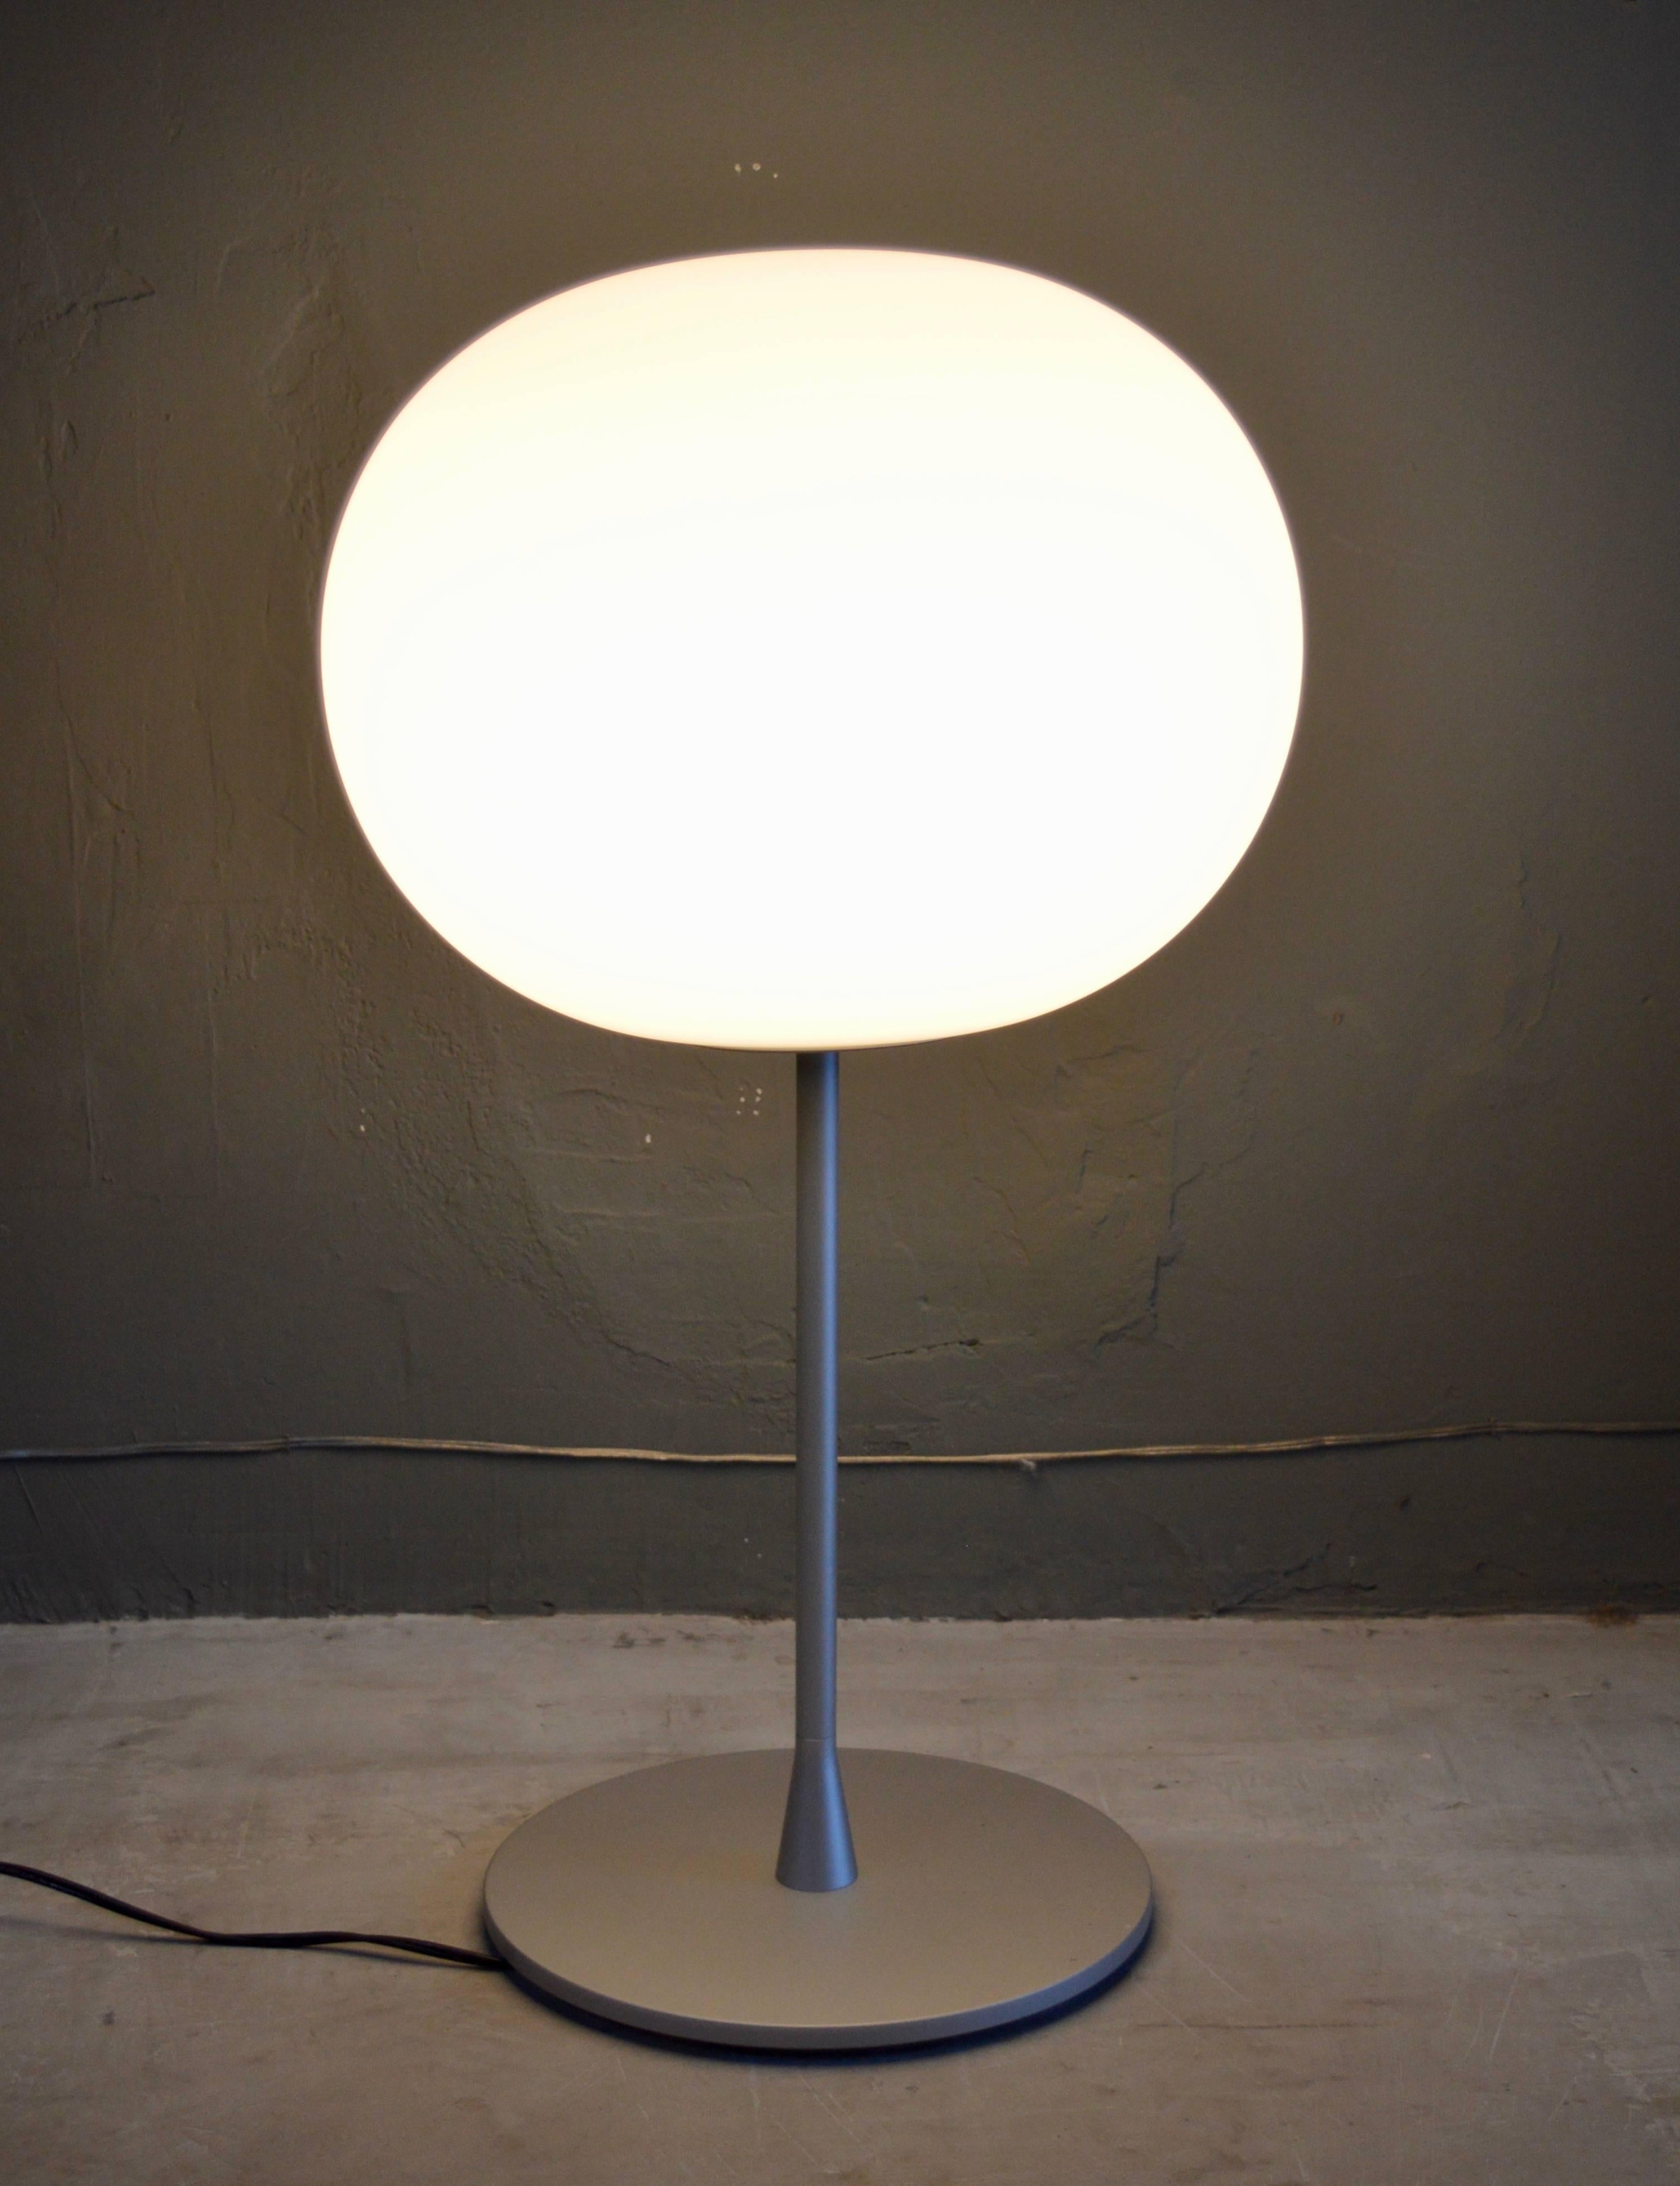 Classic floor lamp by Jasper Morrison for Flos. Massive glass ball atop a brushed nickel base. Dimmable switch. Excellent vintage condition. Matching large floor lamp available in separate listing. 

Diameter of globe is 17.75